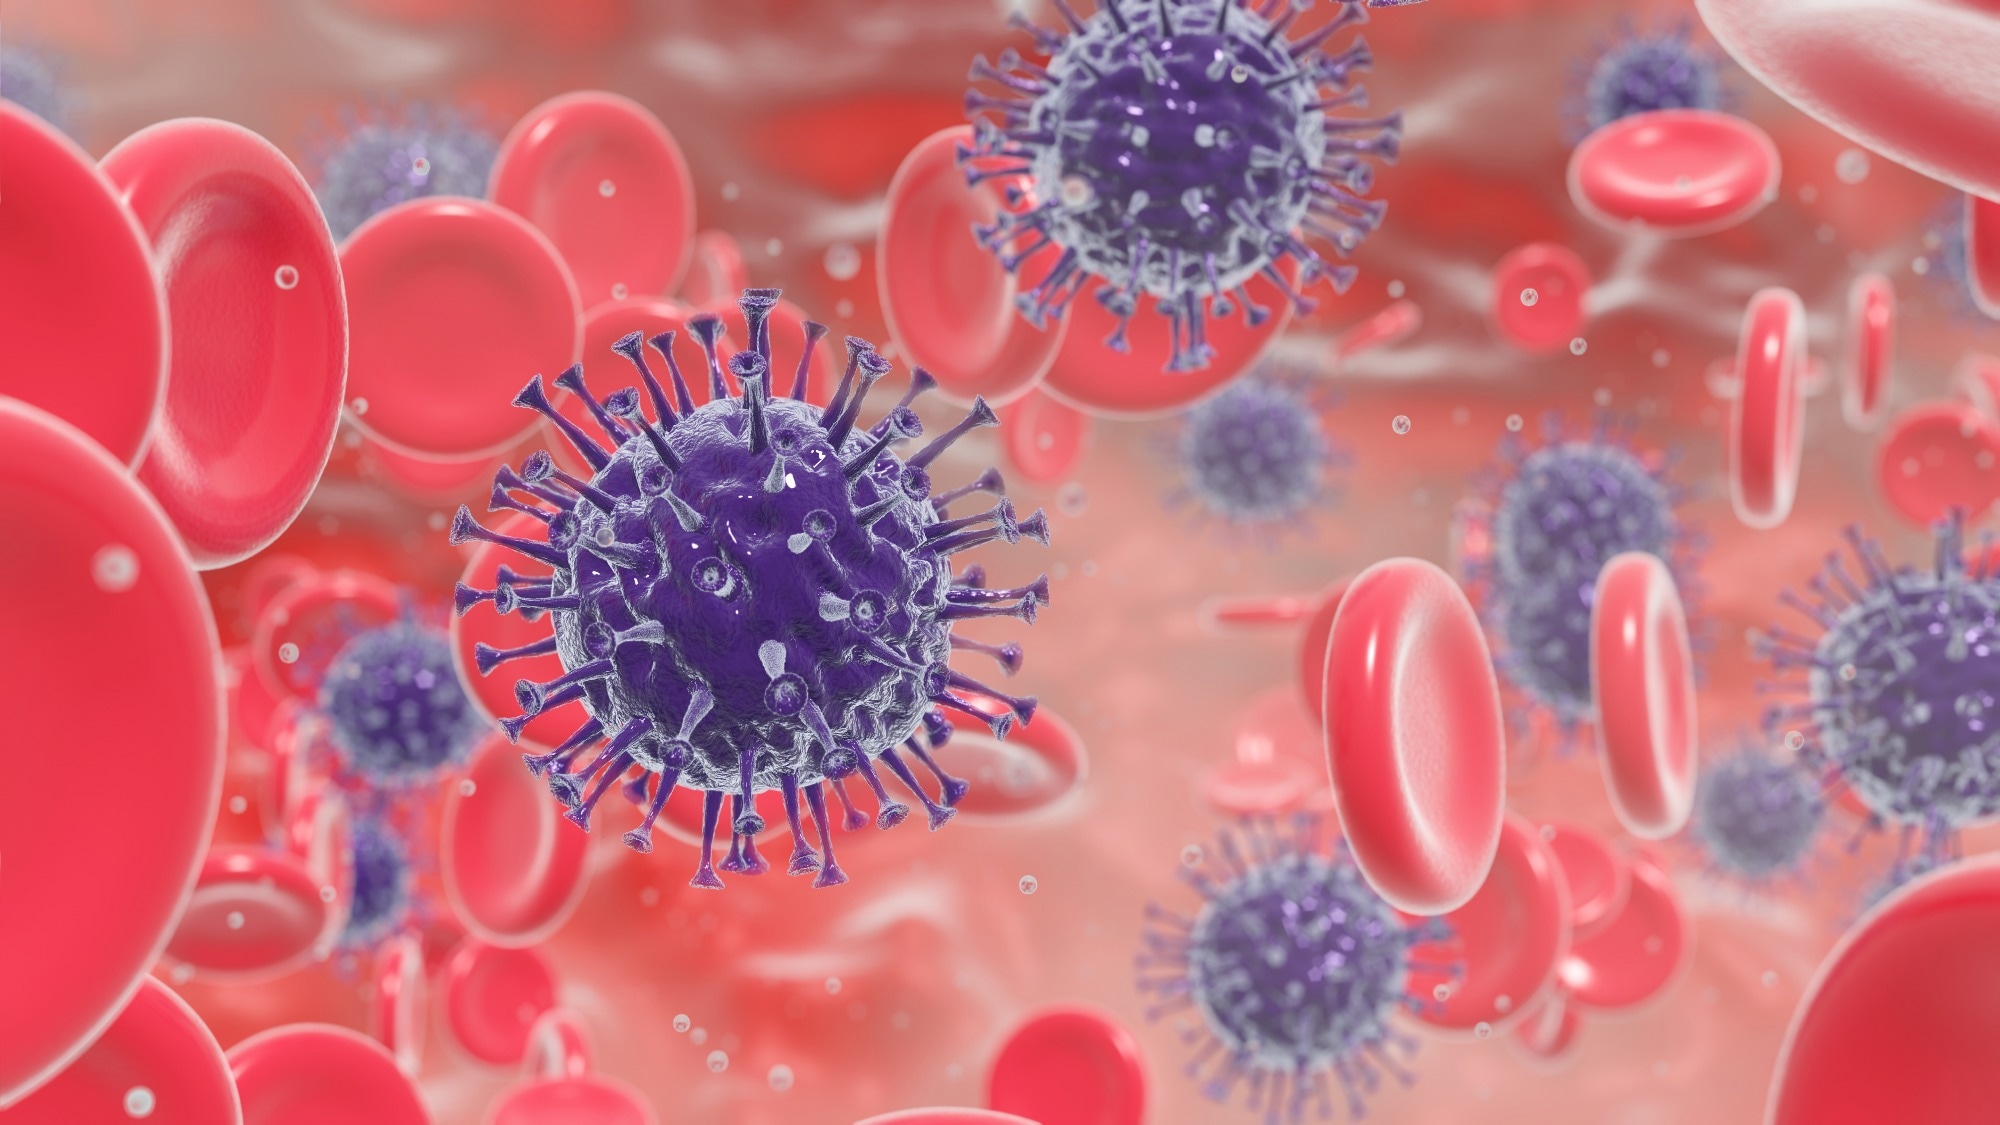 Study: An mRNA-based T-cell-inducing antigen strengthens COVID-19 vaccine against SARS-CoV-2 variants. Image Credit: medienspot / Shutterstock.com